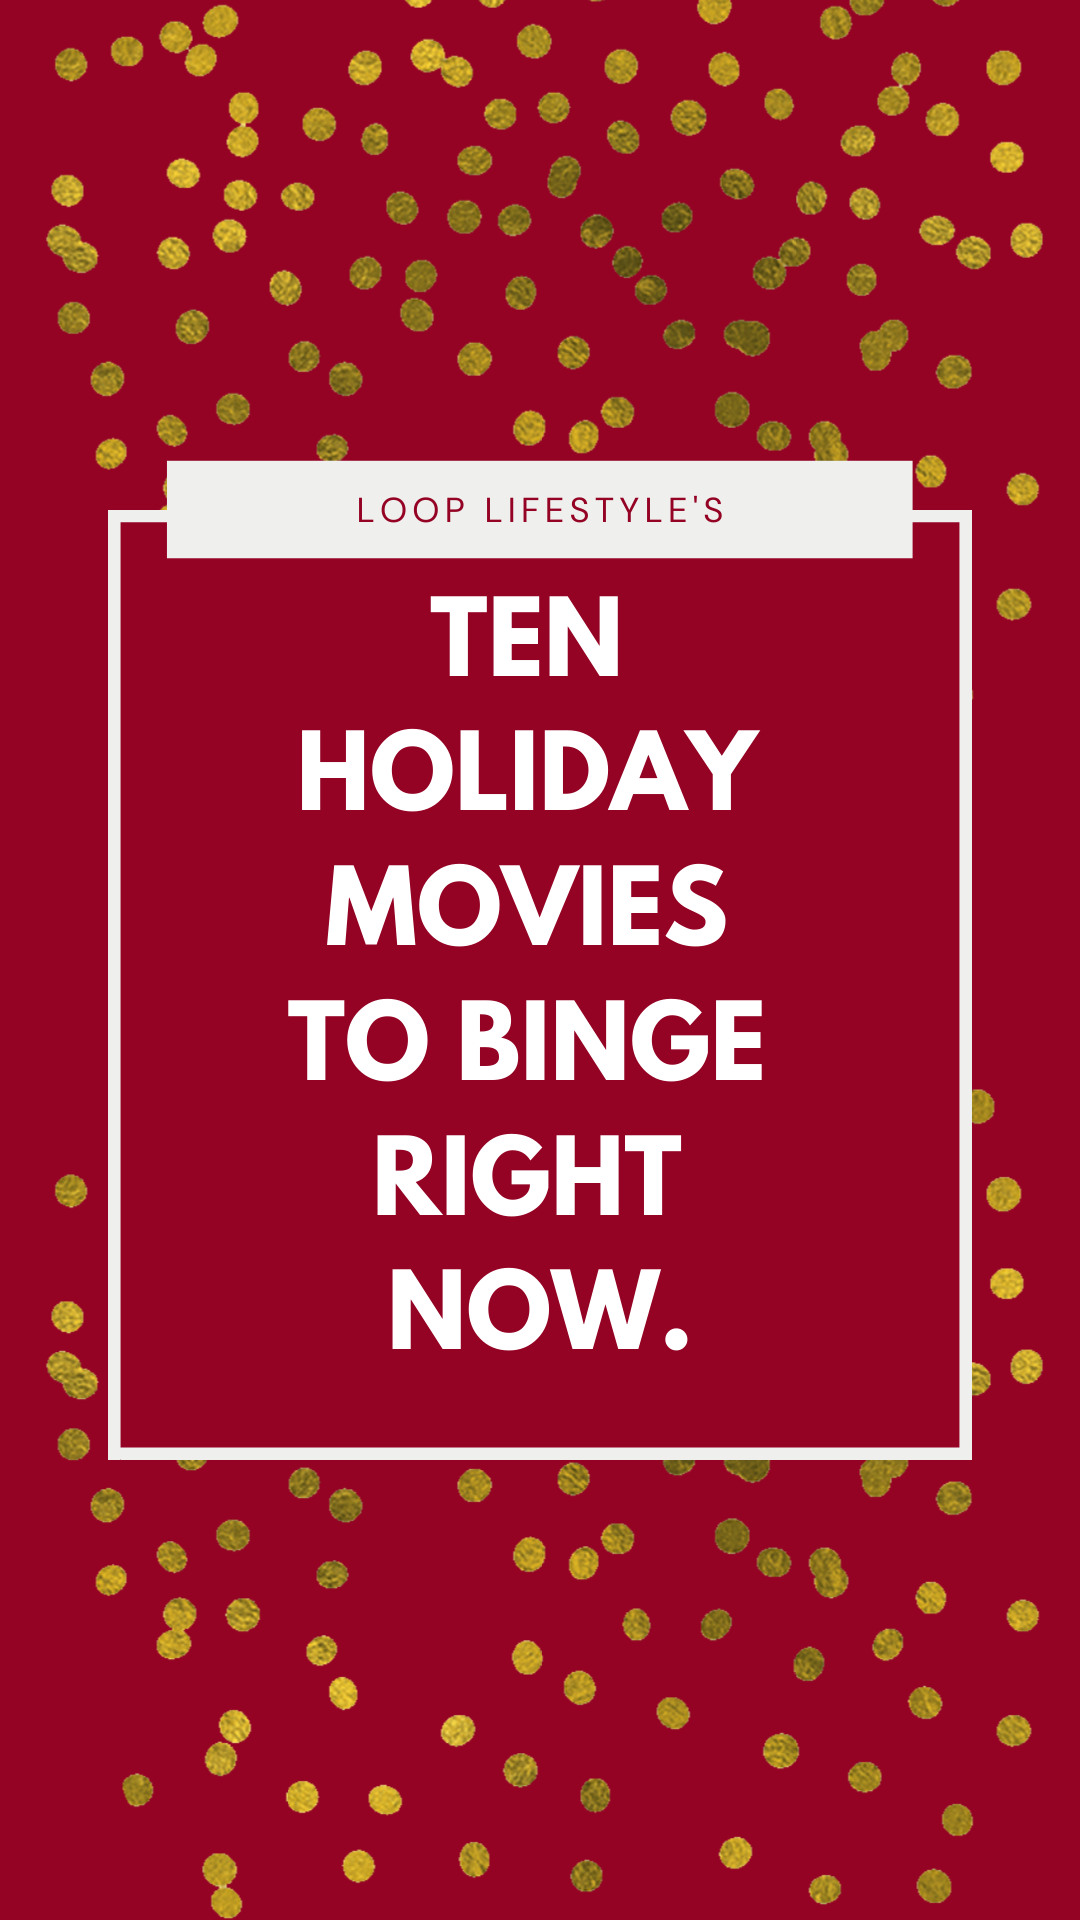 Ten Holiday Movies to Binge Right Now